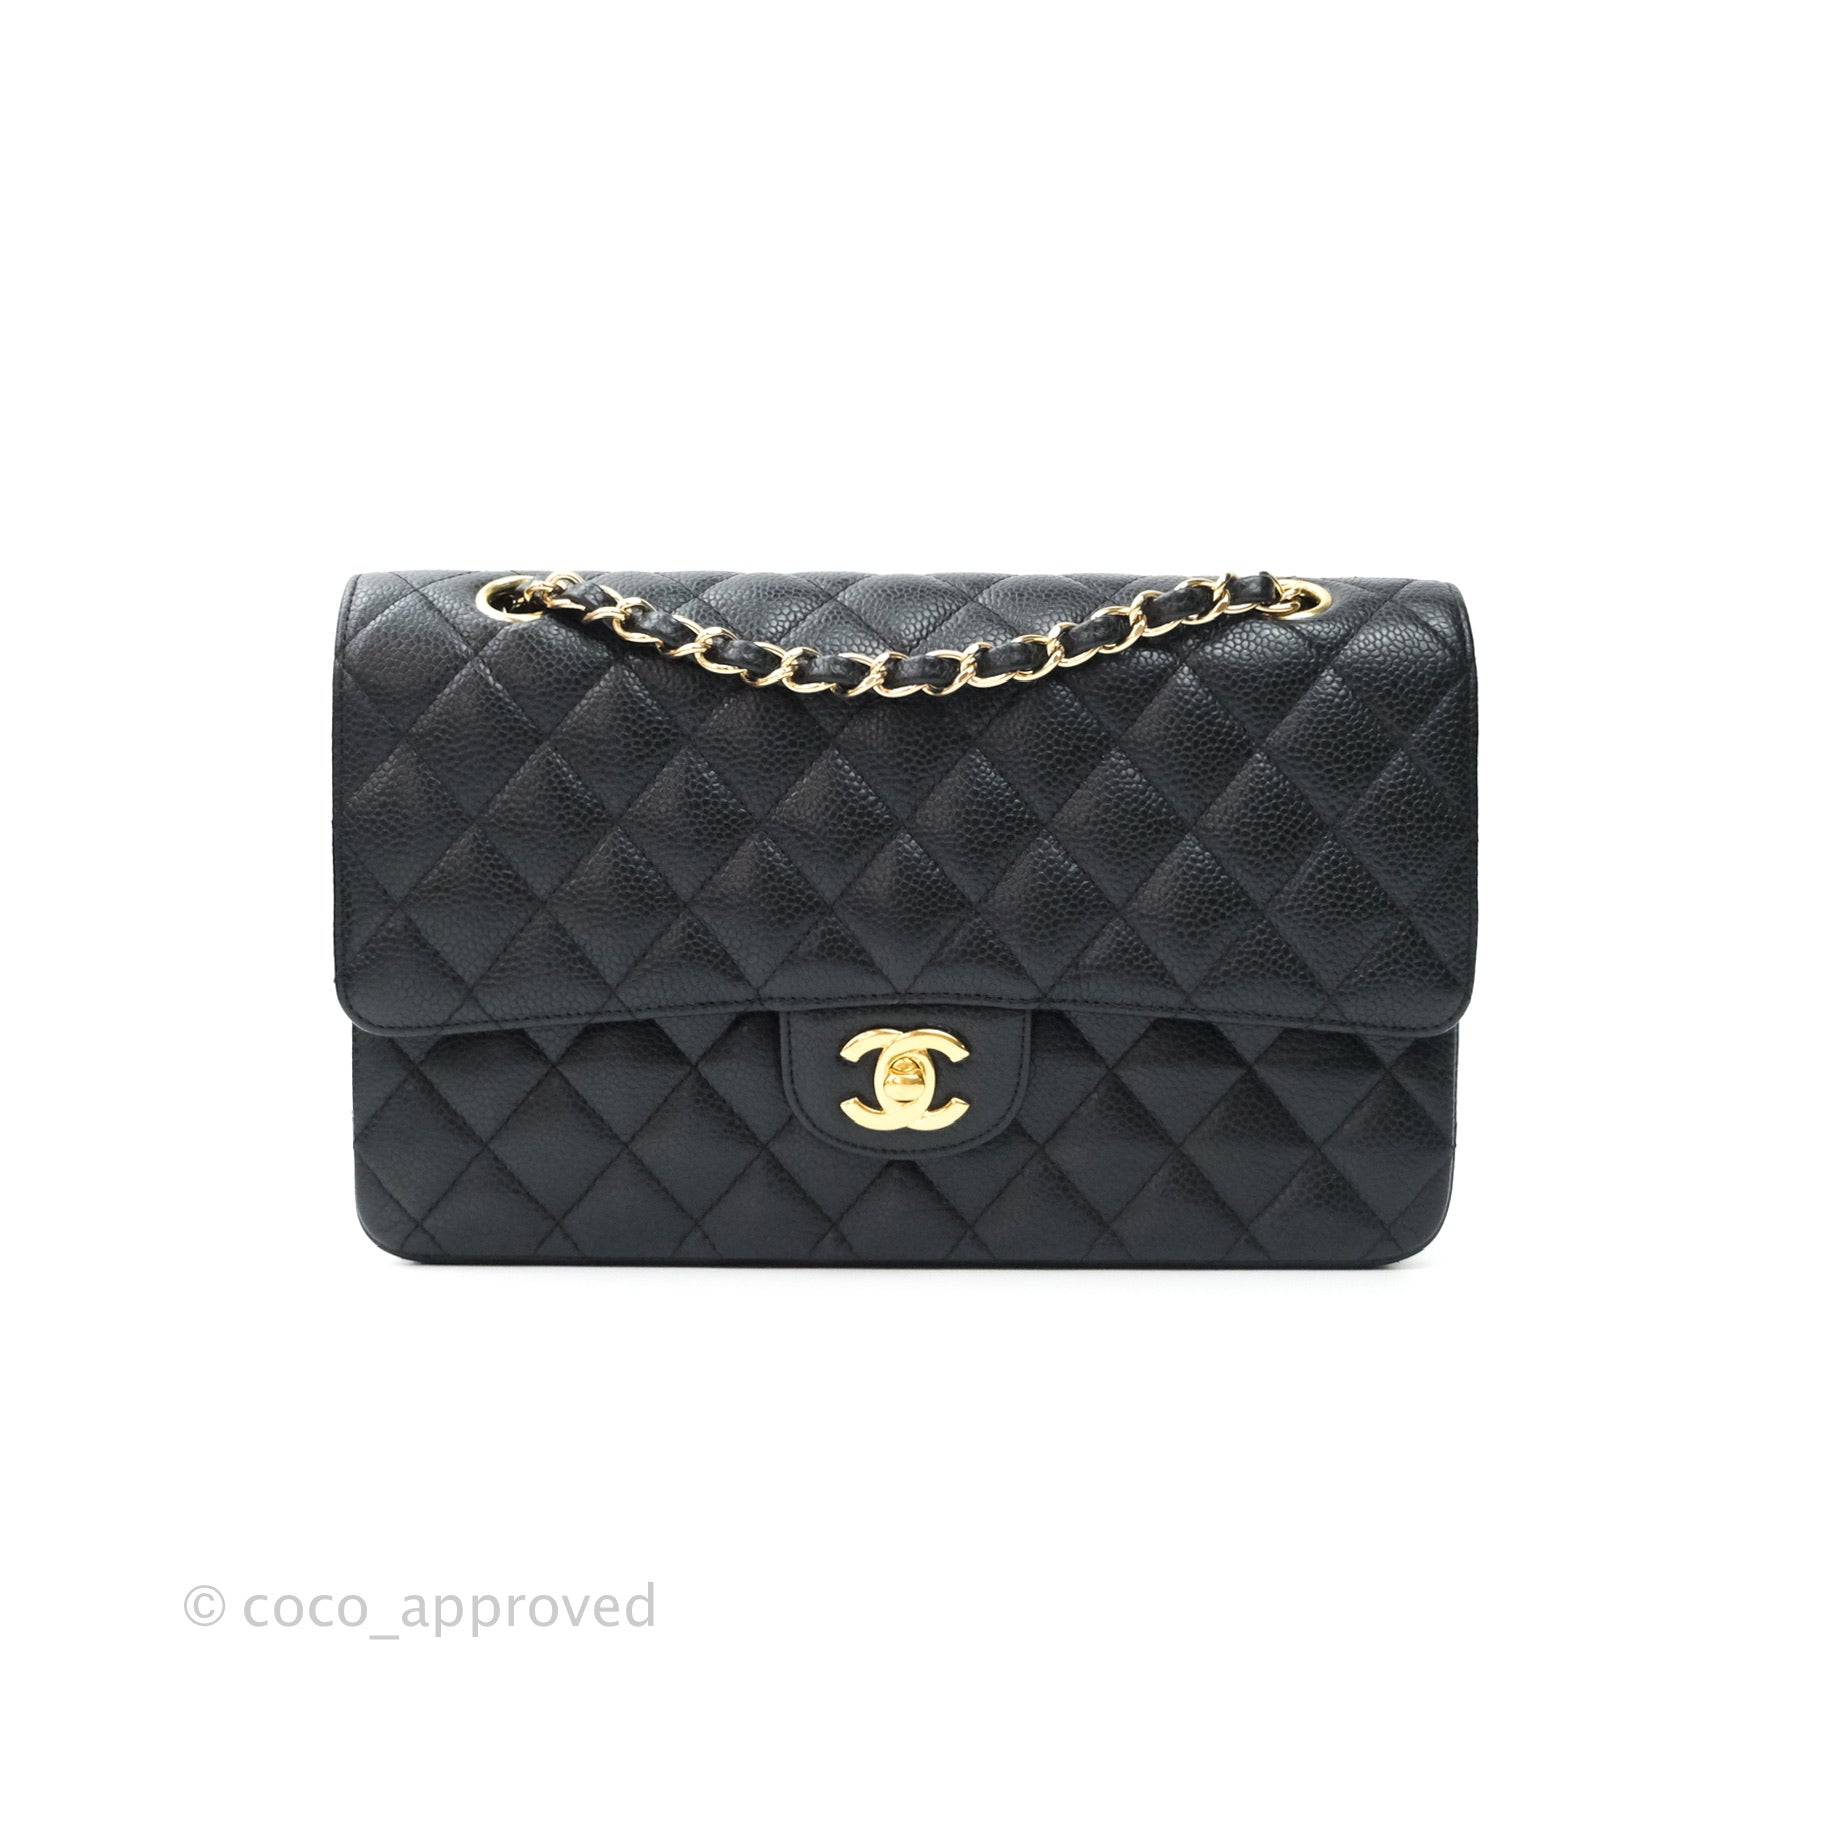 Chanel Caviar Gold Hardware - 372 For Sale on 1stDibs  chanel jumbo caviar  gold hardware, chanel classic flap medium caviar gold hardware, chanel  medium flap caviar gold hardware